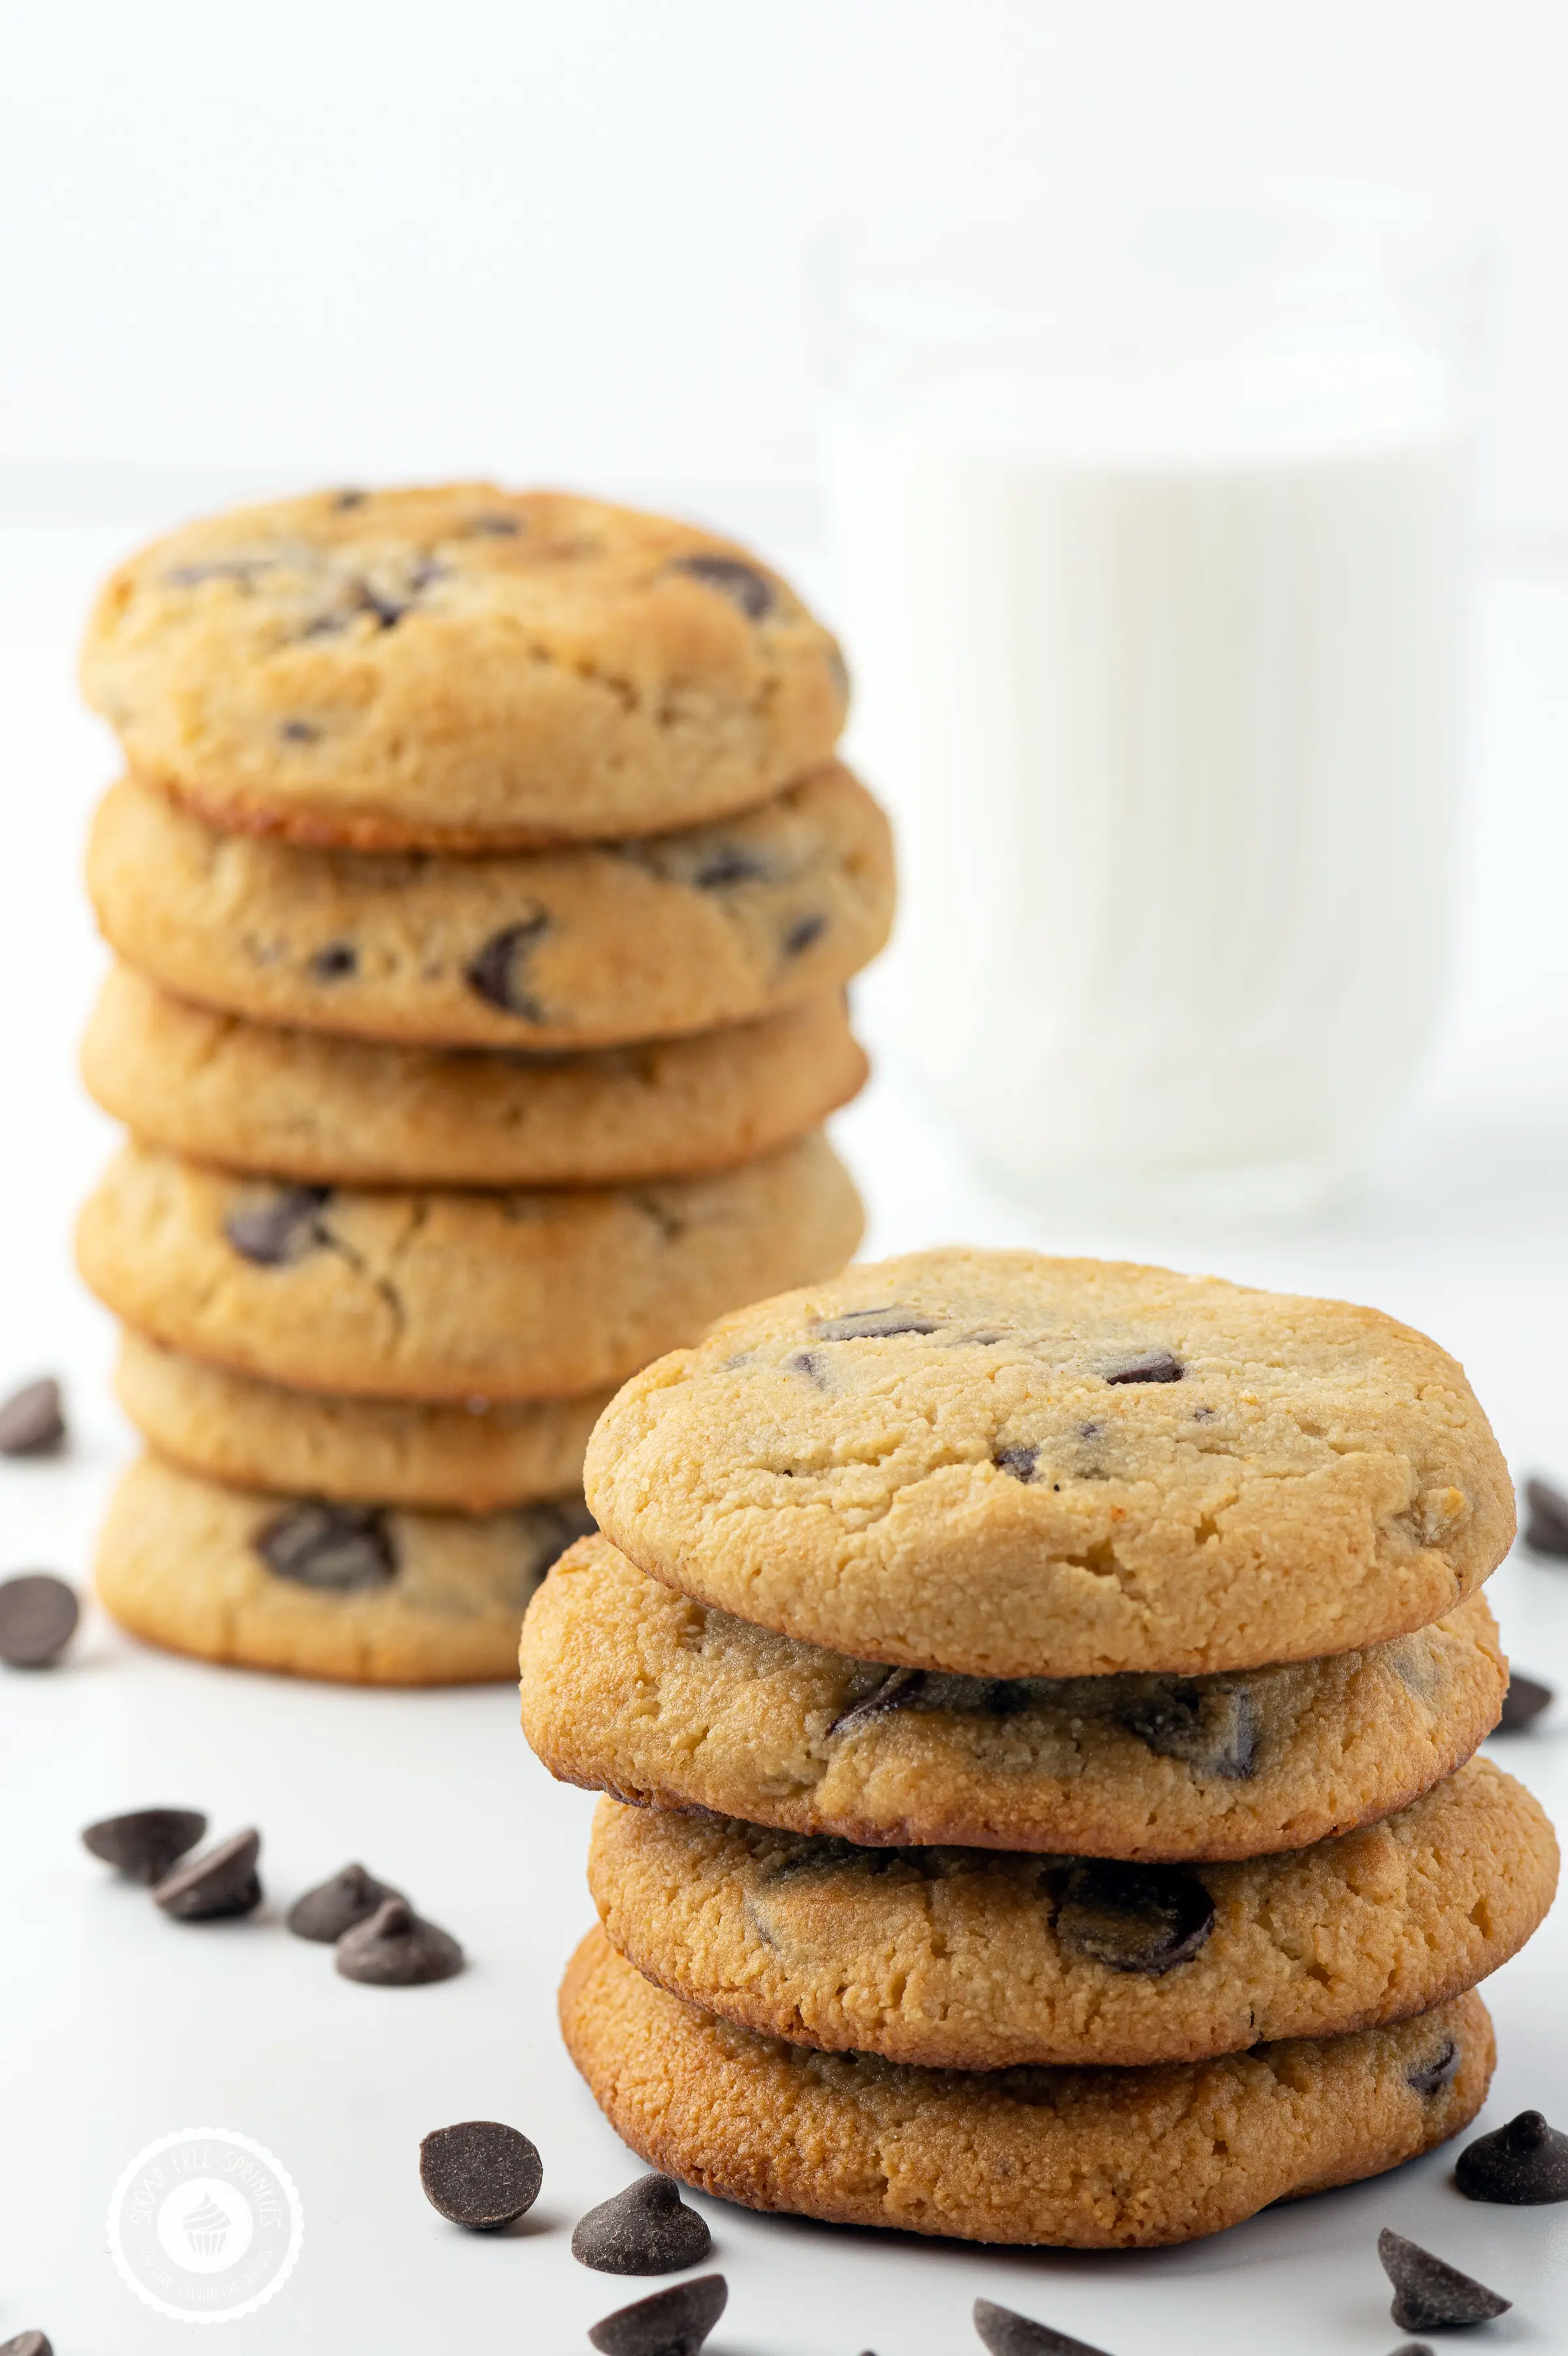 Stacks of keto chocolate chip cookies on a white background with scattered chocolate chips and a glass in the background filled with milk. 